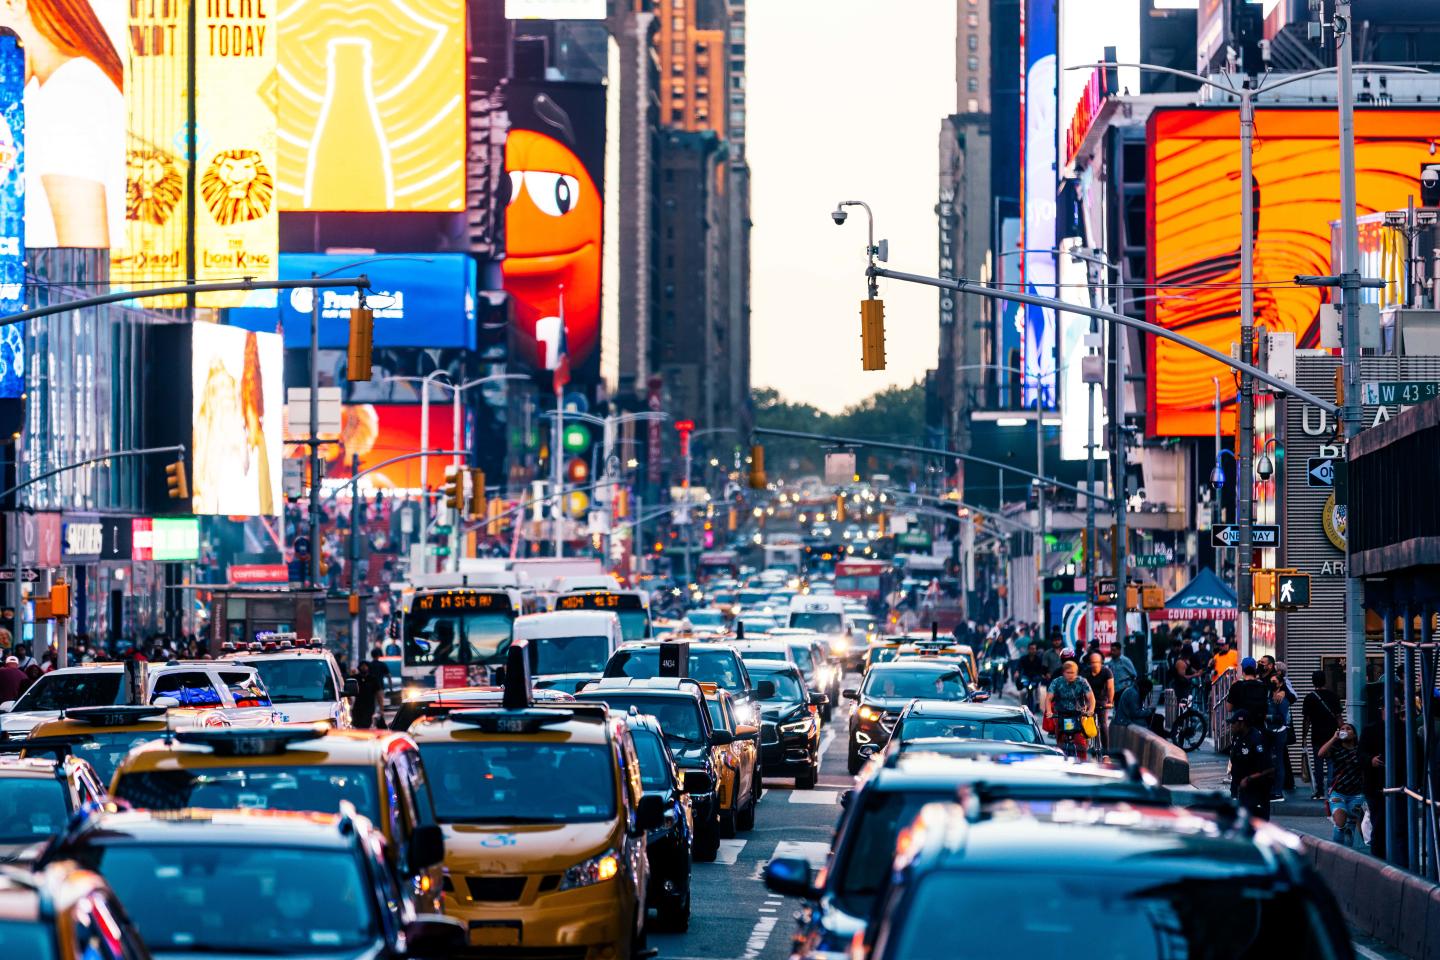 A New York City street packed with traffic